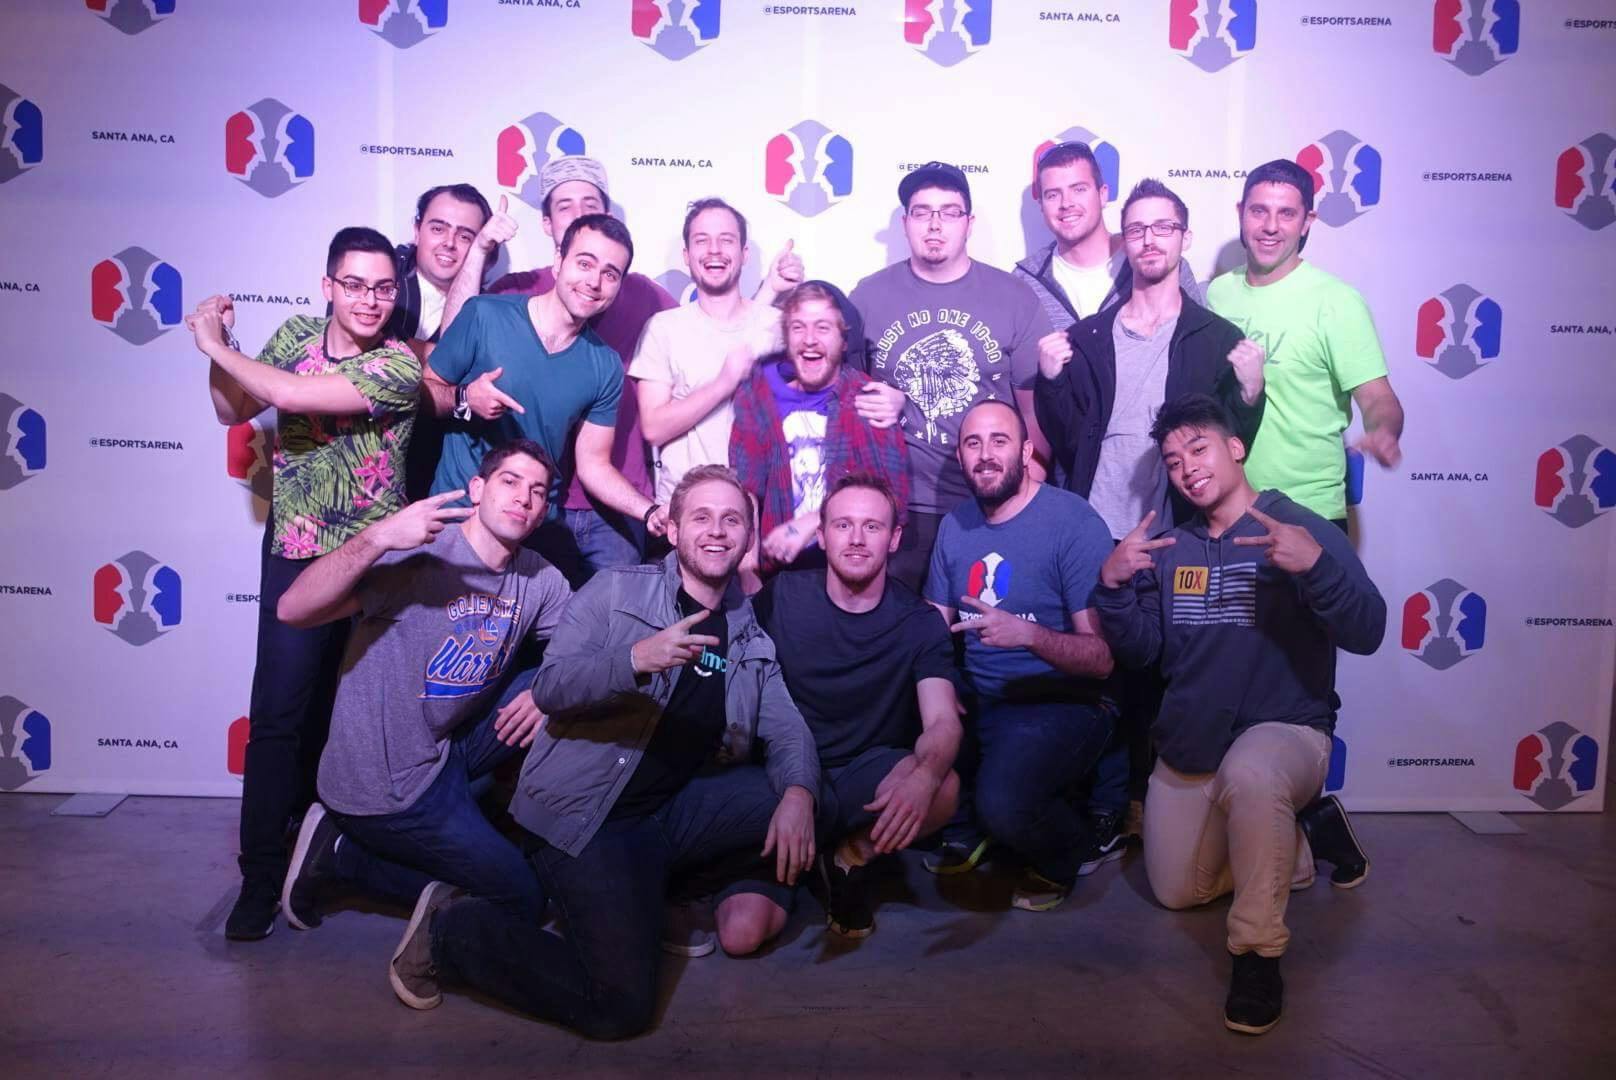 A group image of attendees attending the Anaheim CA LAN in 2017.